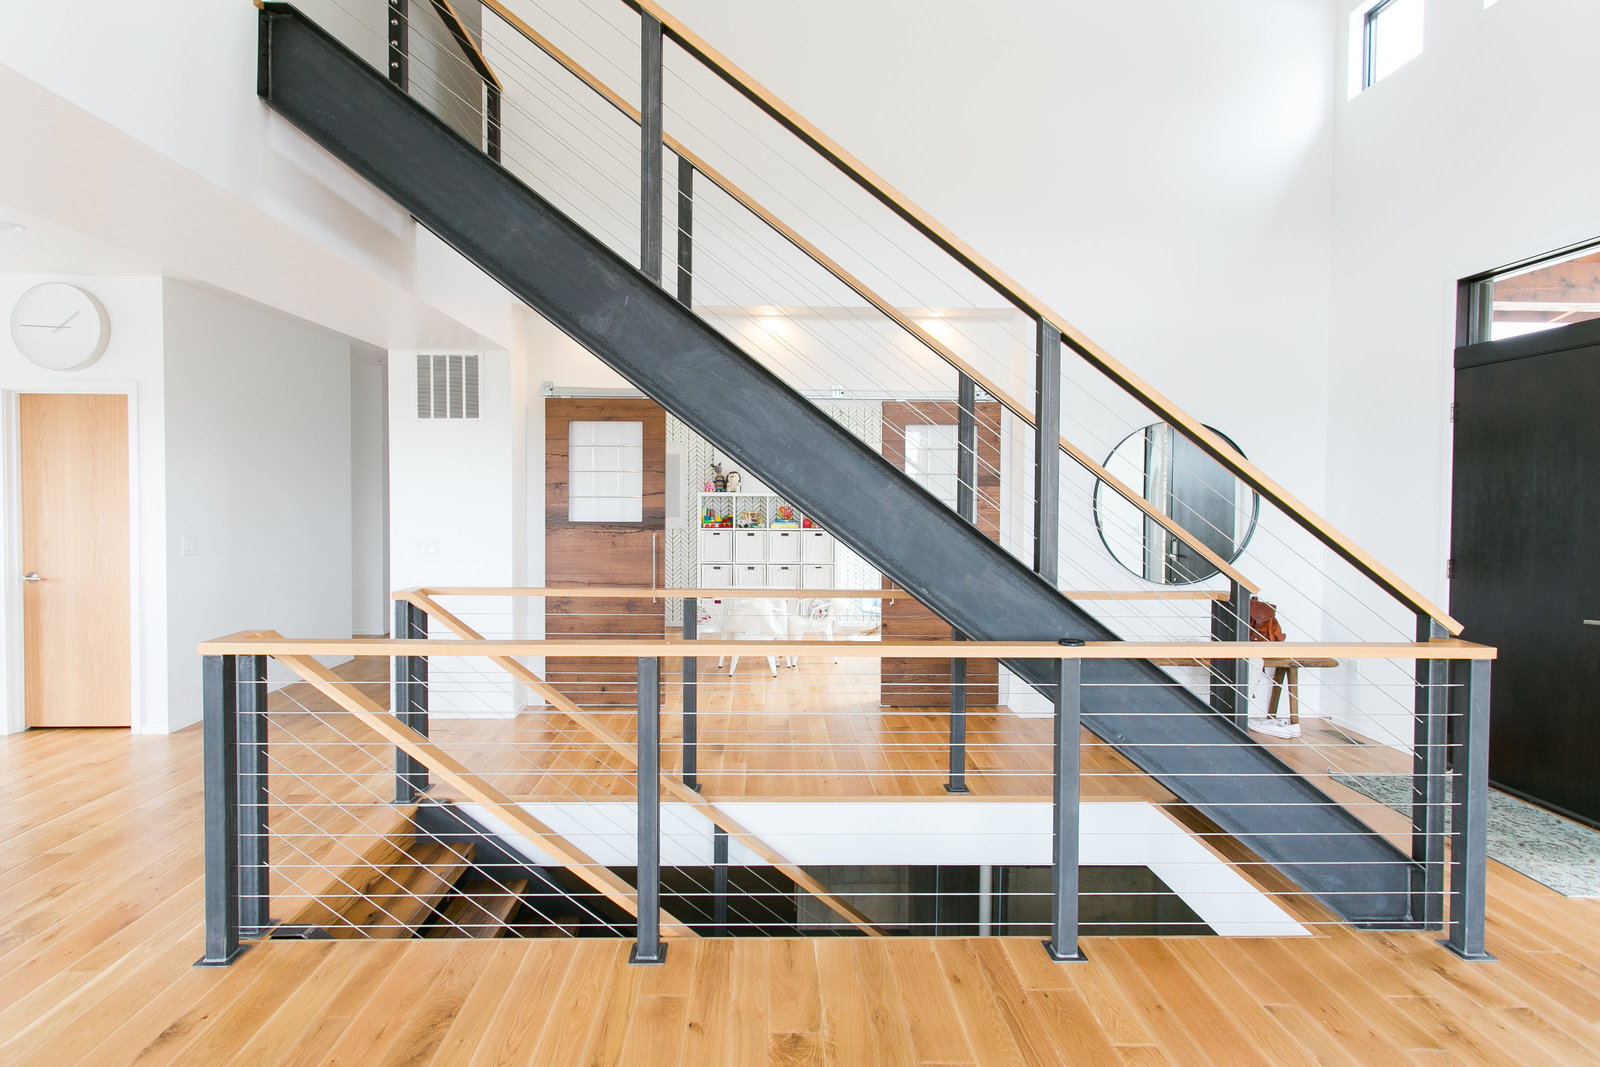 Modern, wood and metal staircase